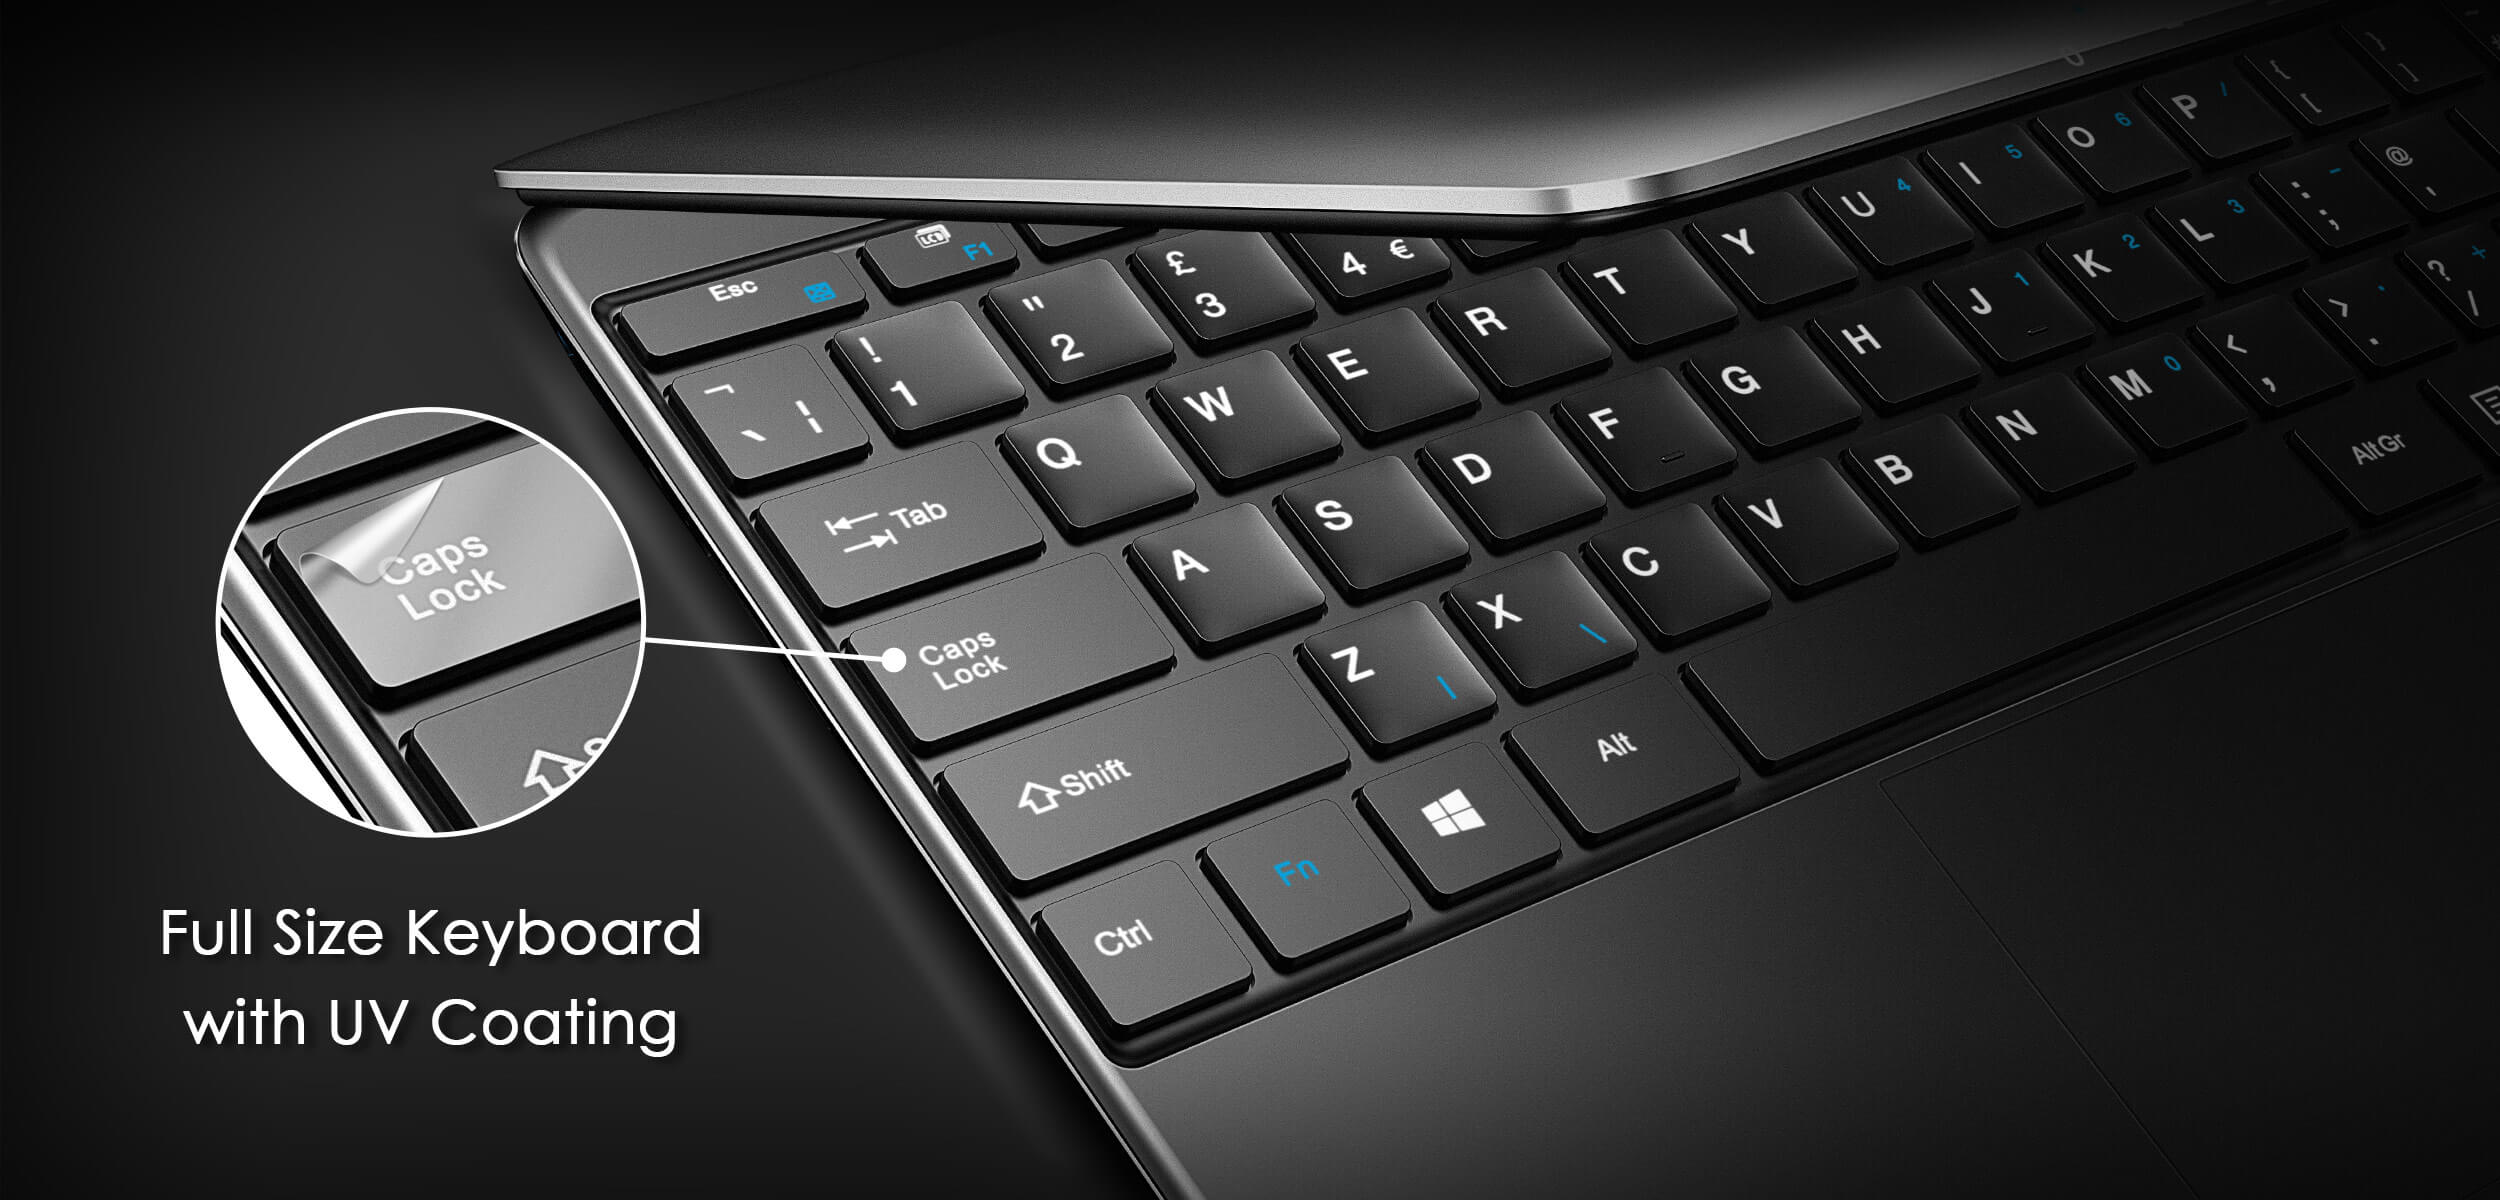 portable windows laptop with full size keyboard with UV coating